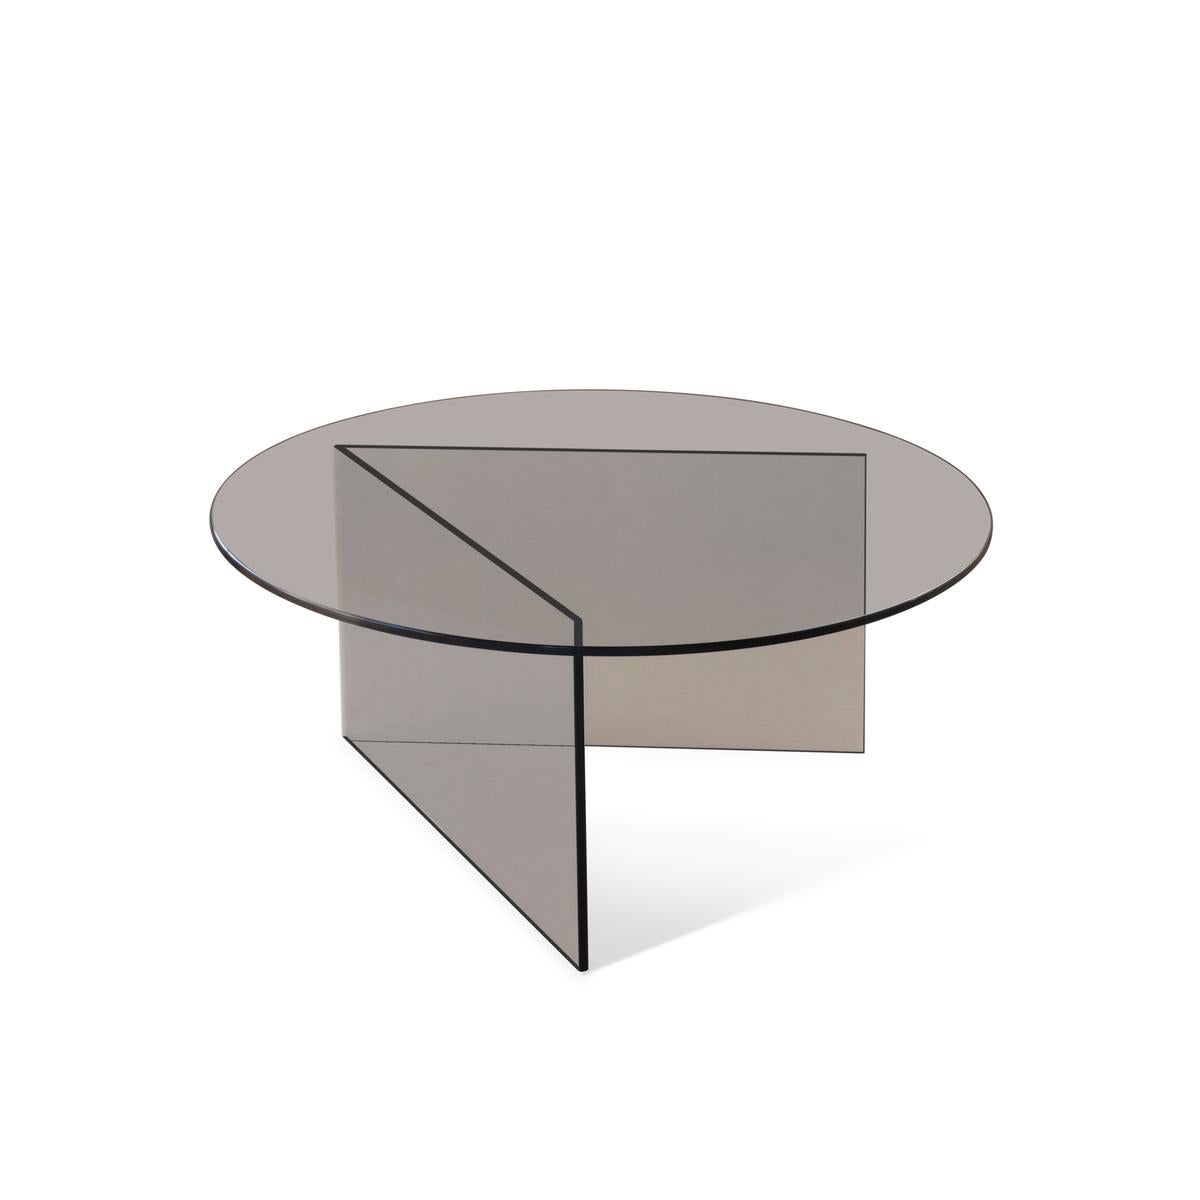 Pond coffee table
Design: Friends & Founders

Material: glass
* Clear
* Bronze
* Grey smoke


Contemporary design studio Friends & Founders was founded in 2003 by IDA Linea and Rasmus Hilderbrand in Copenhagen, Denmark.
For this couple,